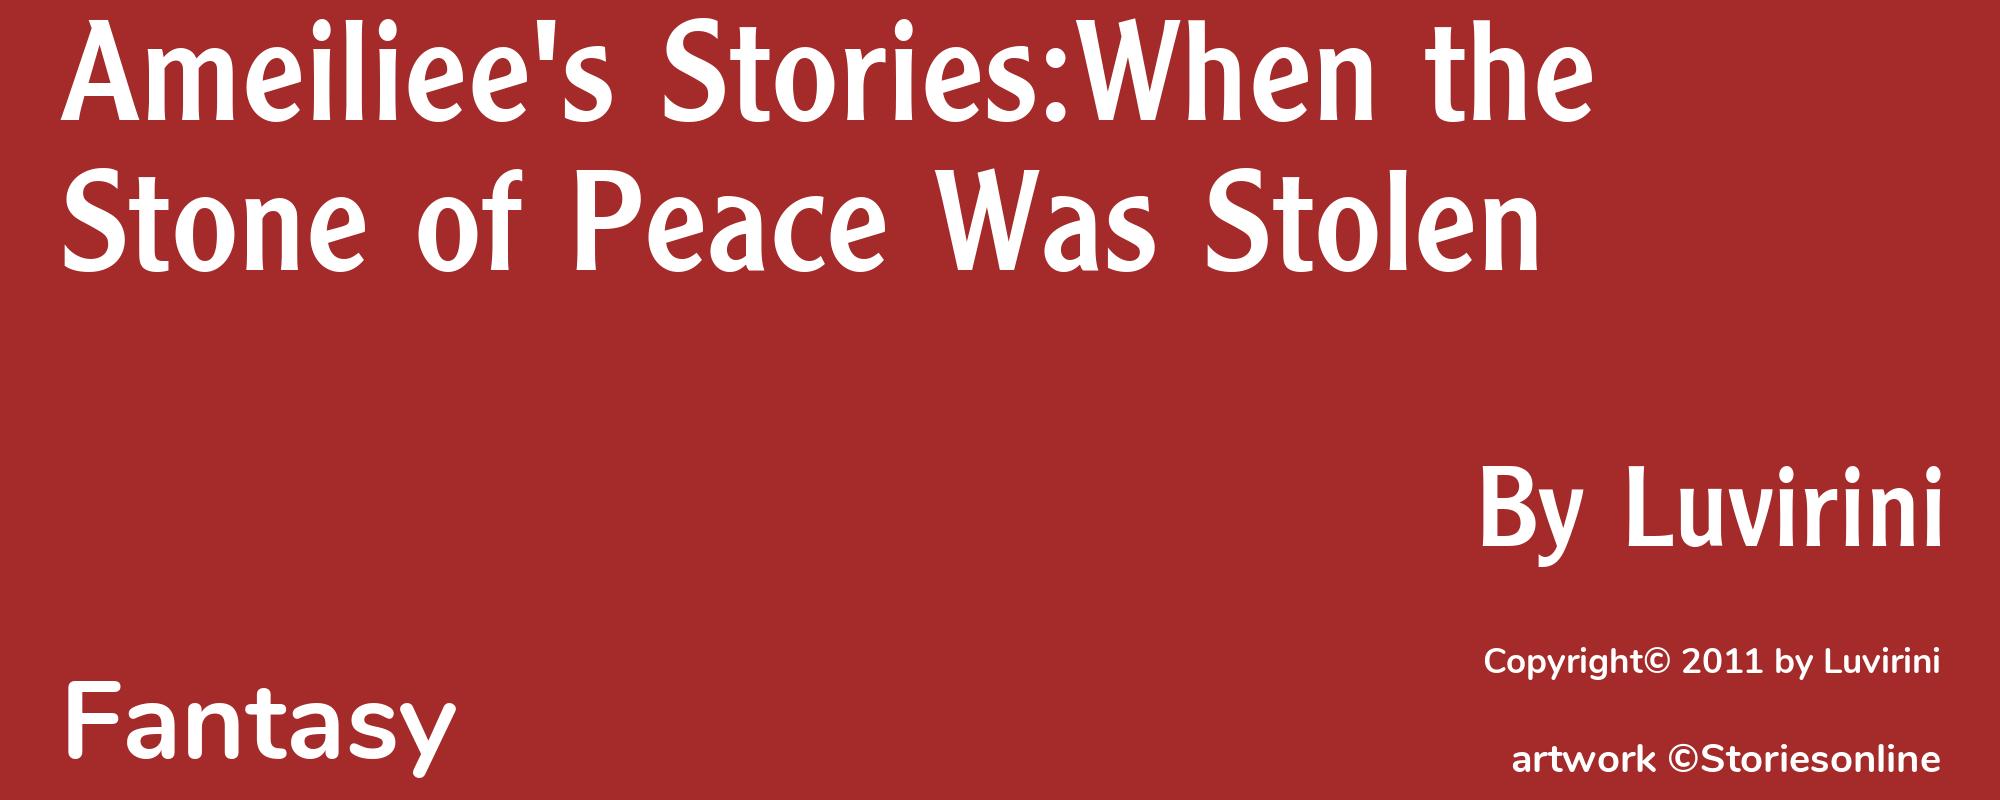 Ameiliee's Stories:When the Stone of Peace Was Stolen - Cover